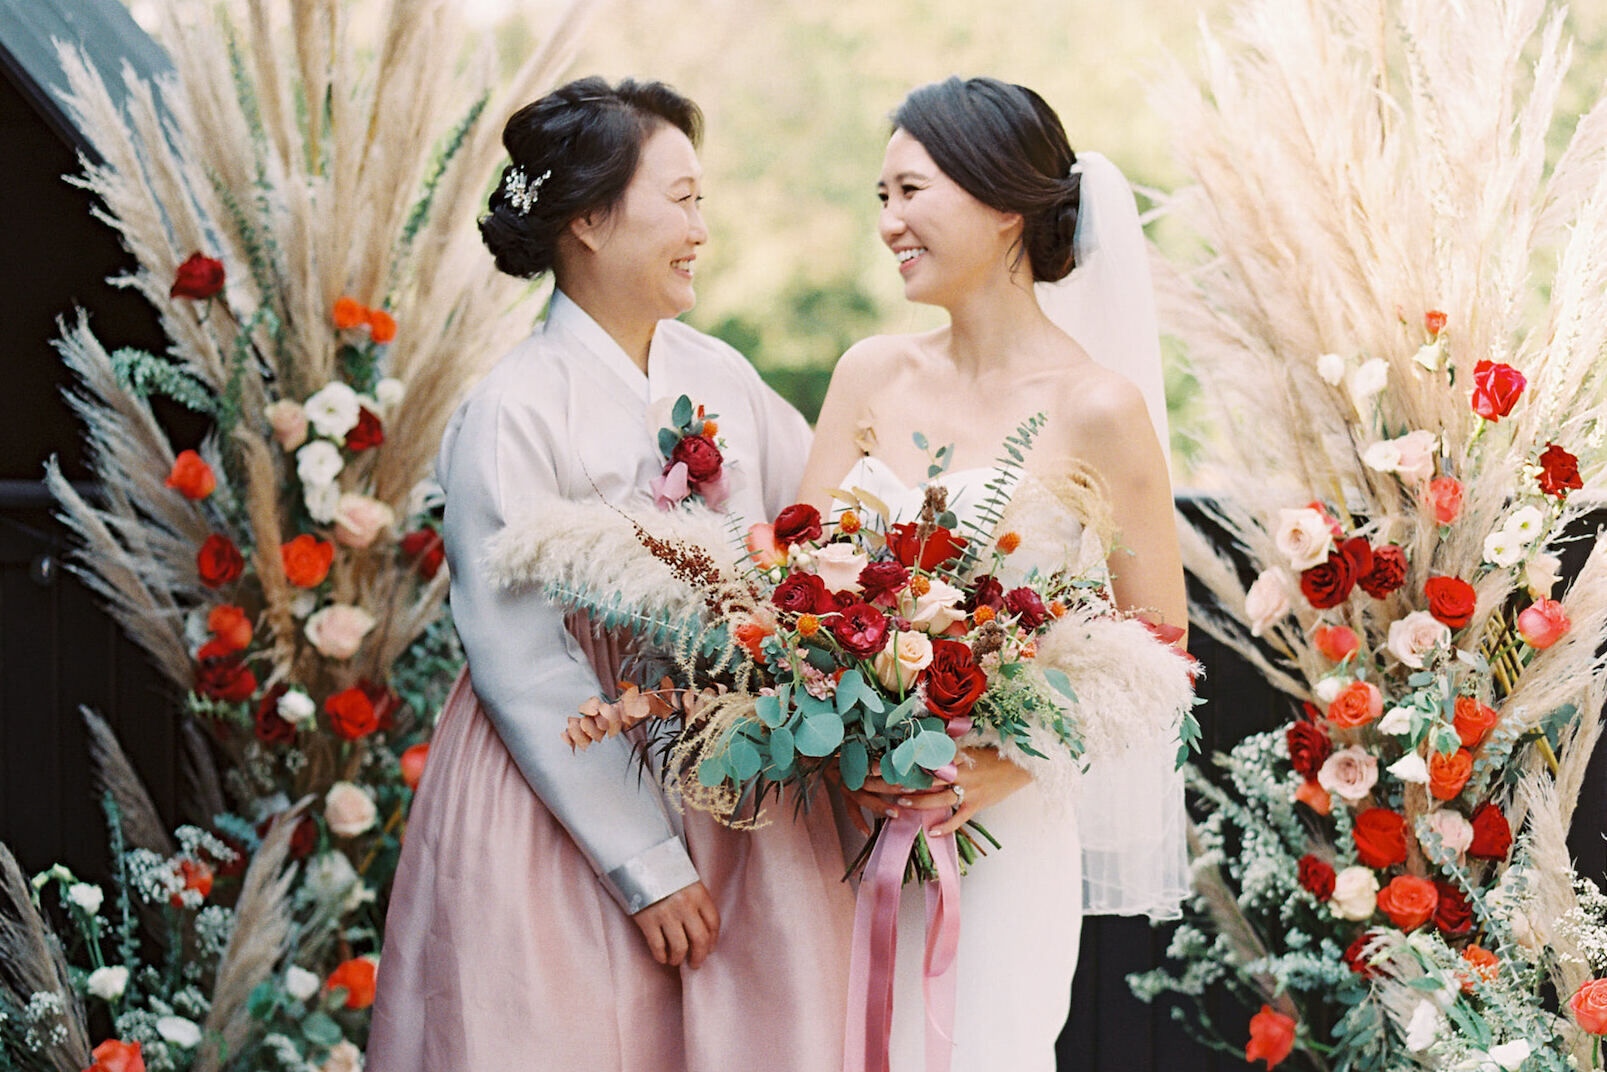 Wedding Traditions: A mother-of-the-bride wearing a traditional Korean hanbok.